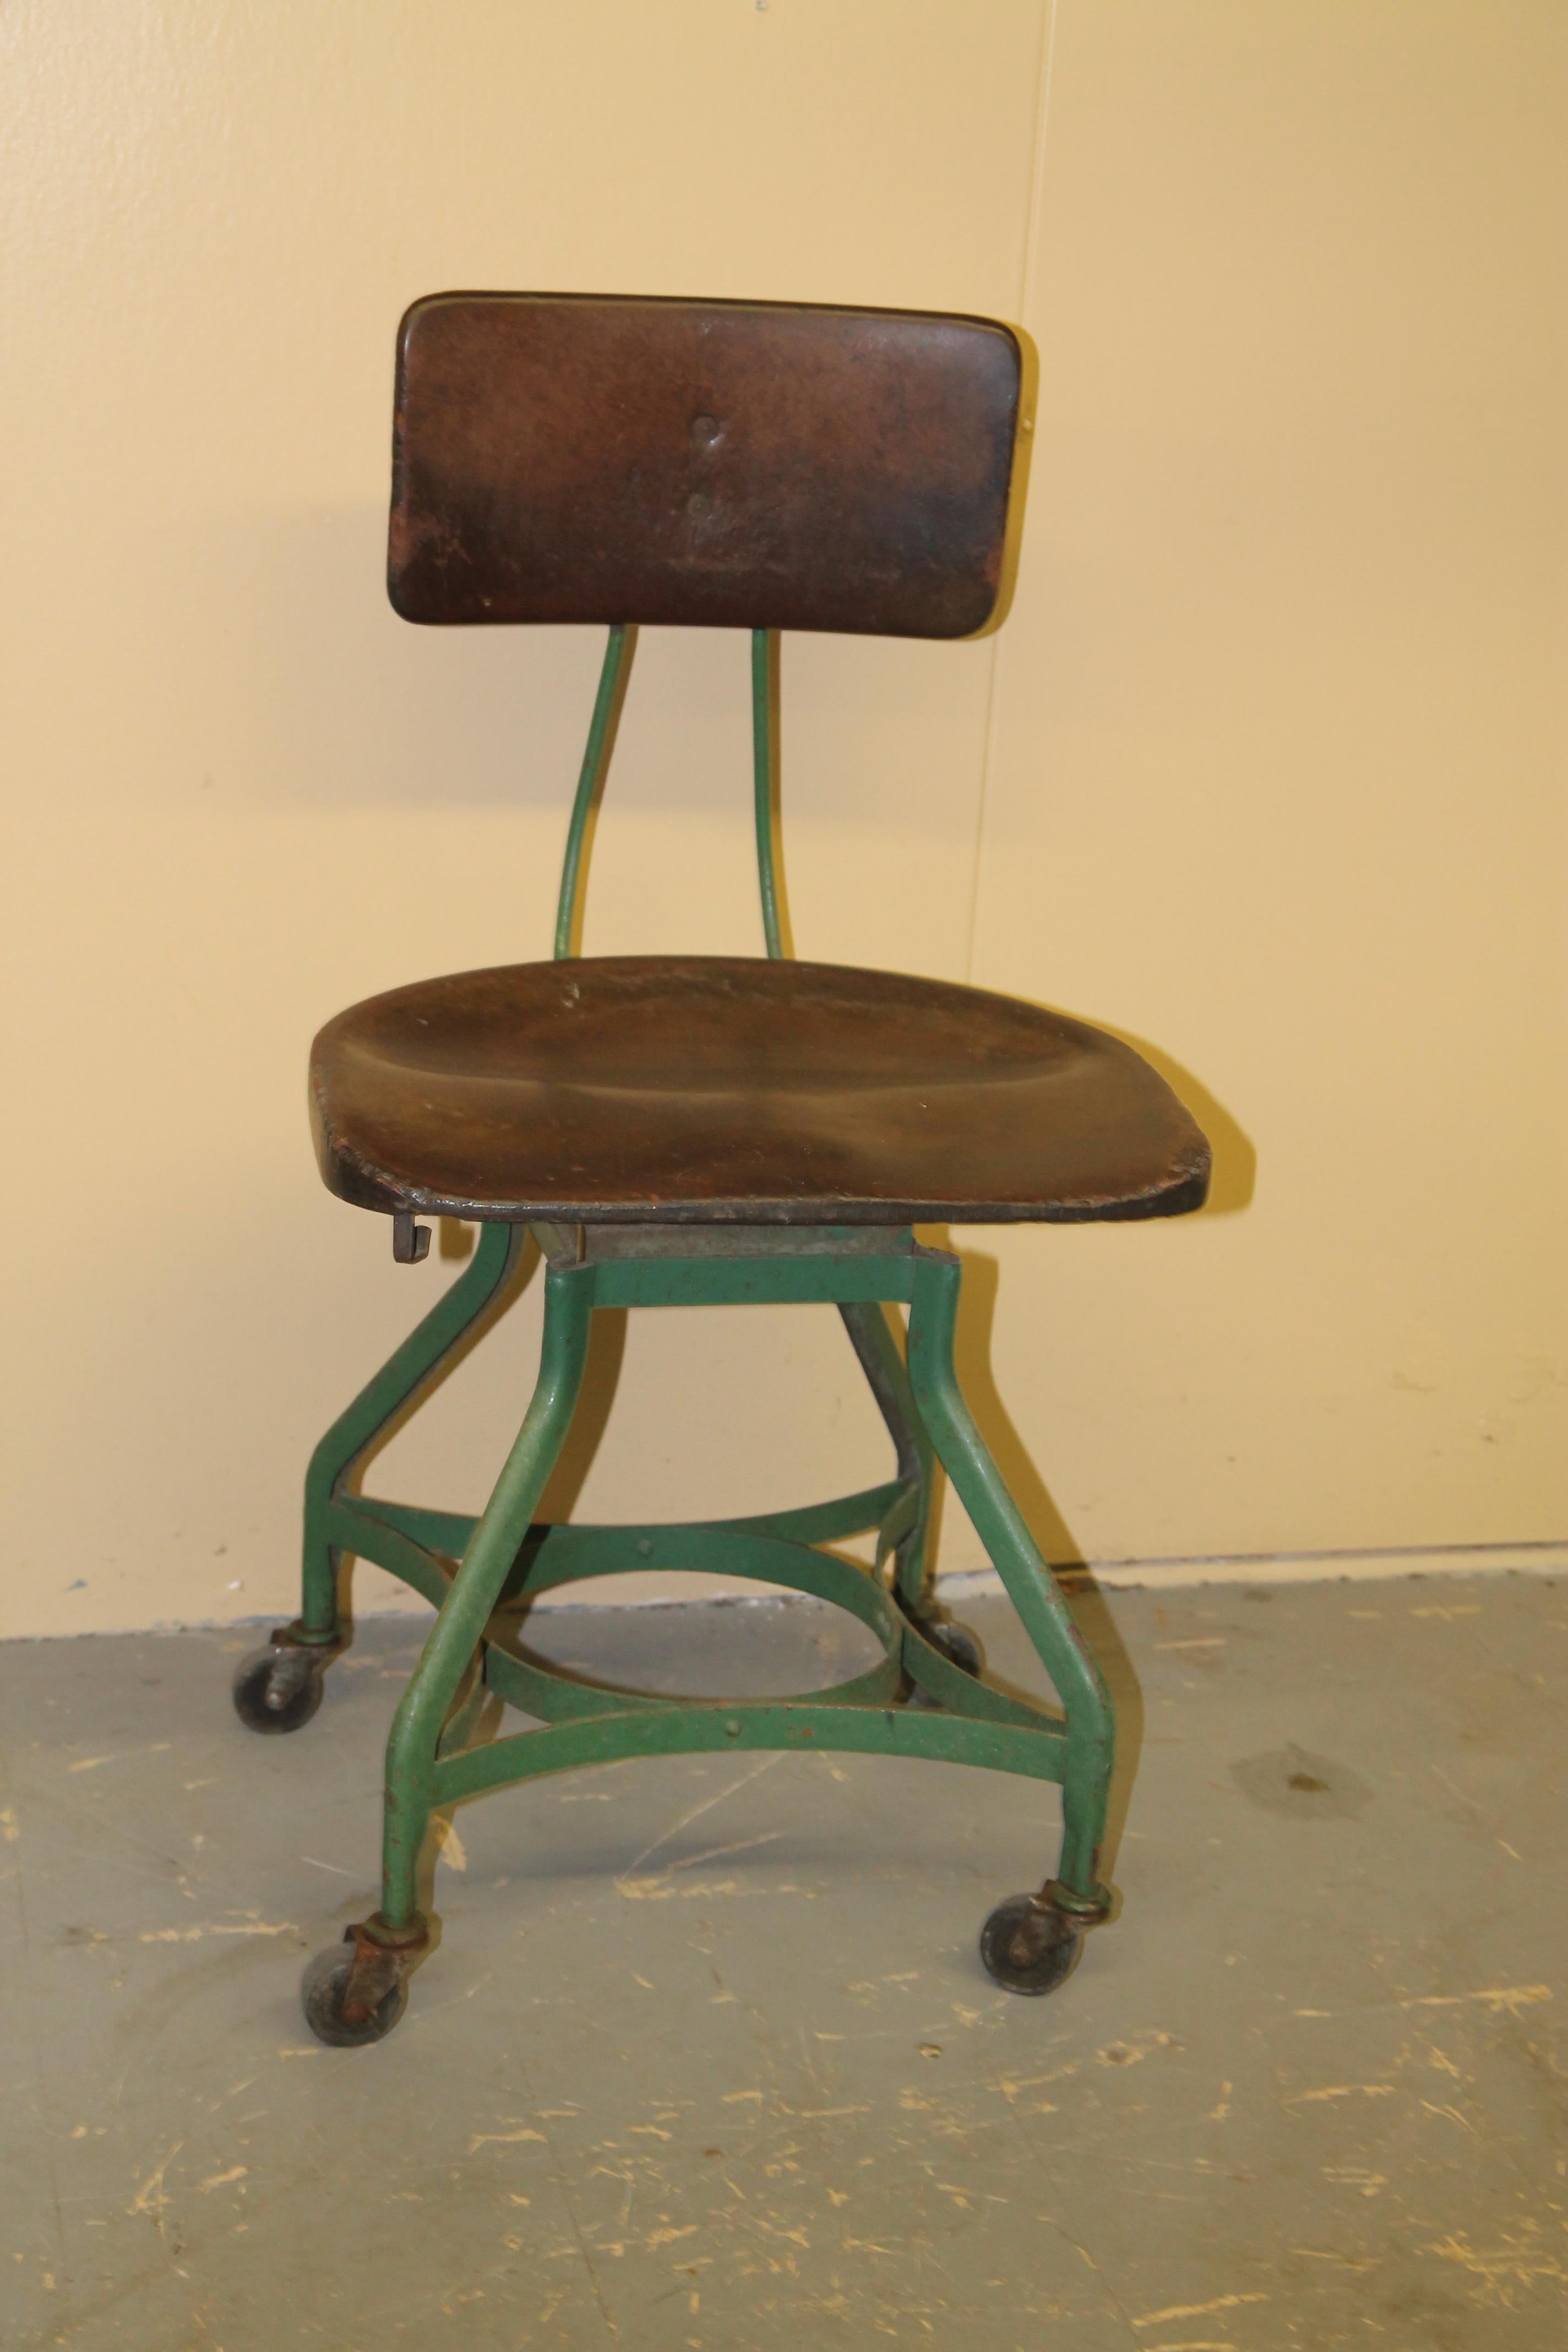 Unusual chair by the Toledo metal furniture Co. Chair has a seat and back made from a composite material that at first glance looks like leather. Have owned many Toledo stools and chairs but have never seen this example.